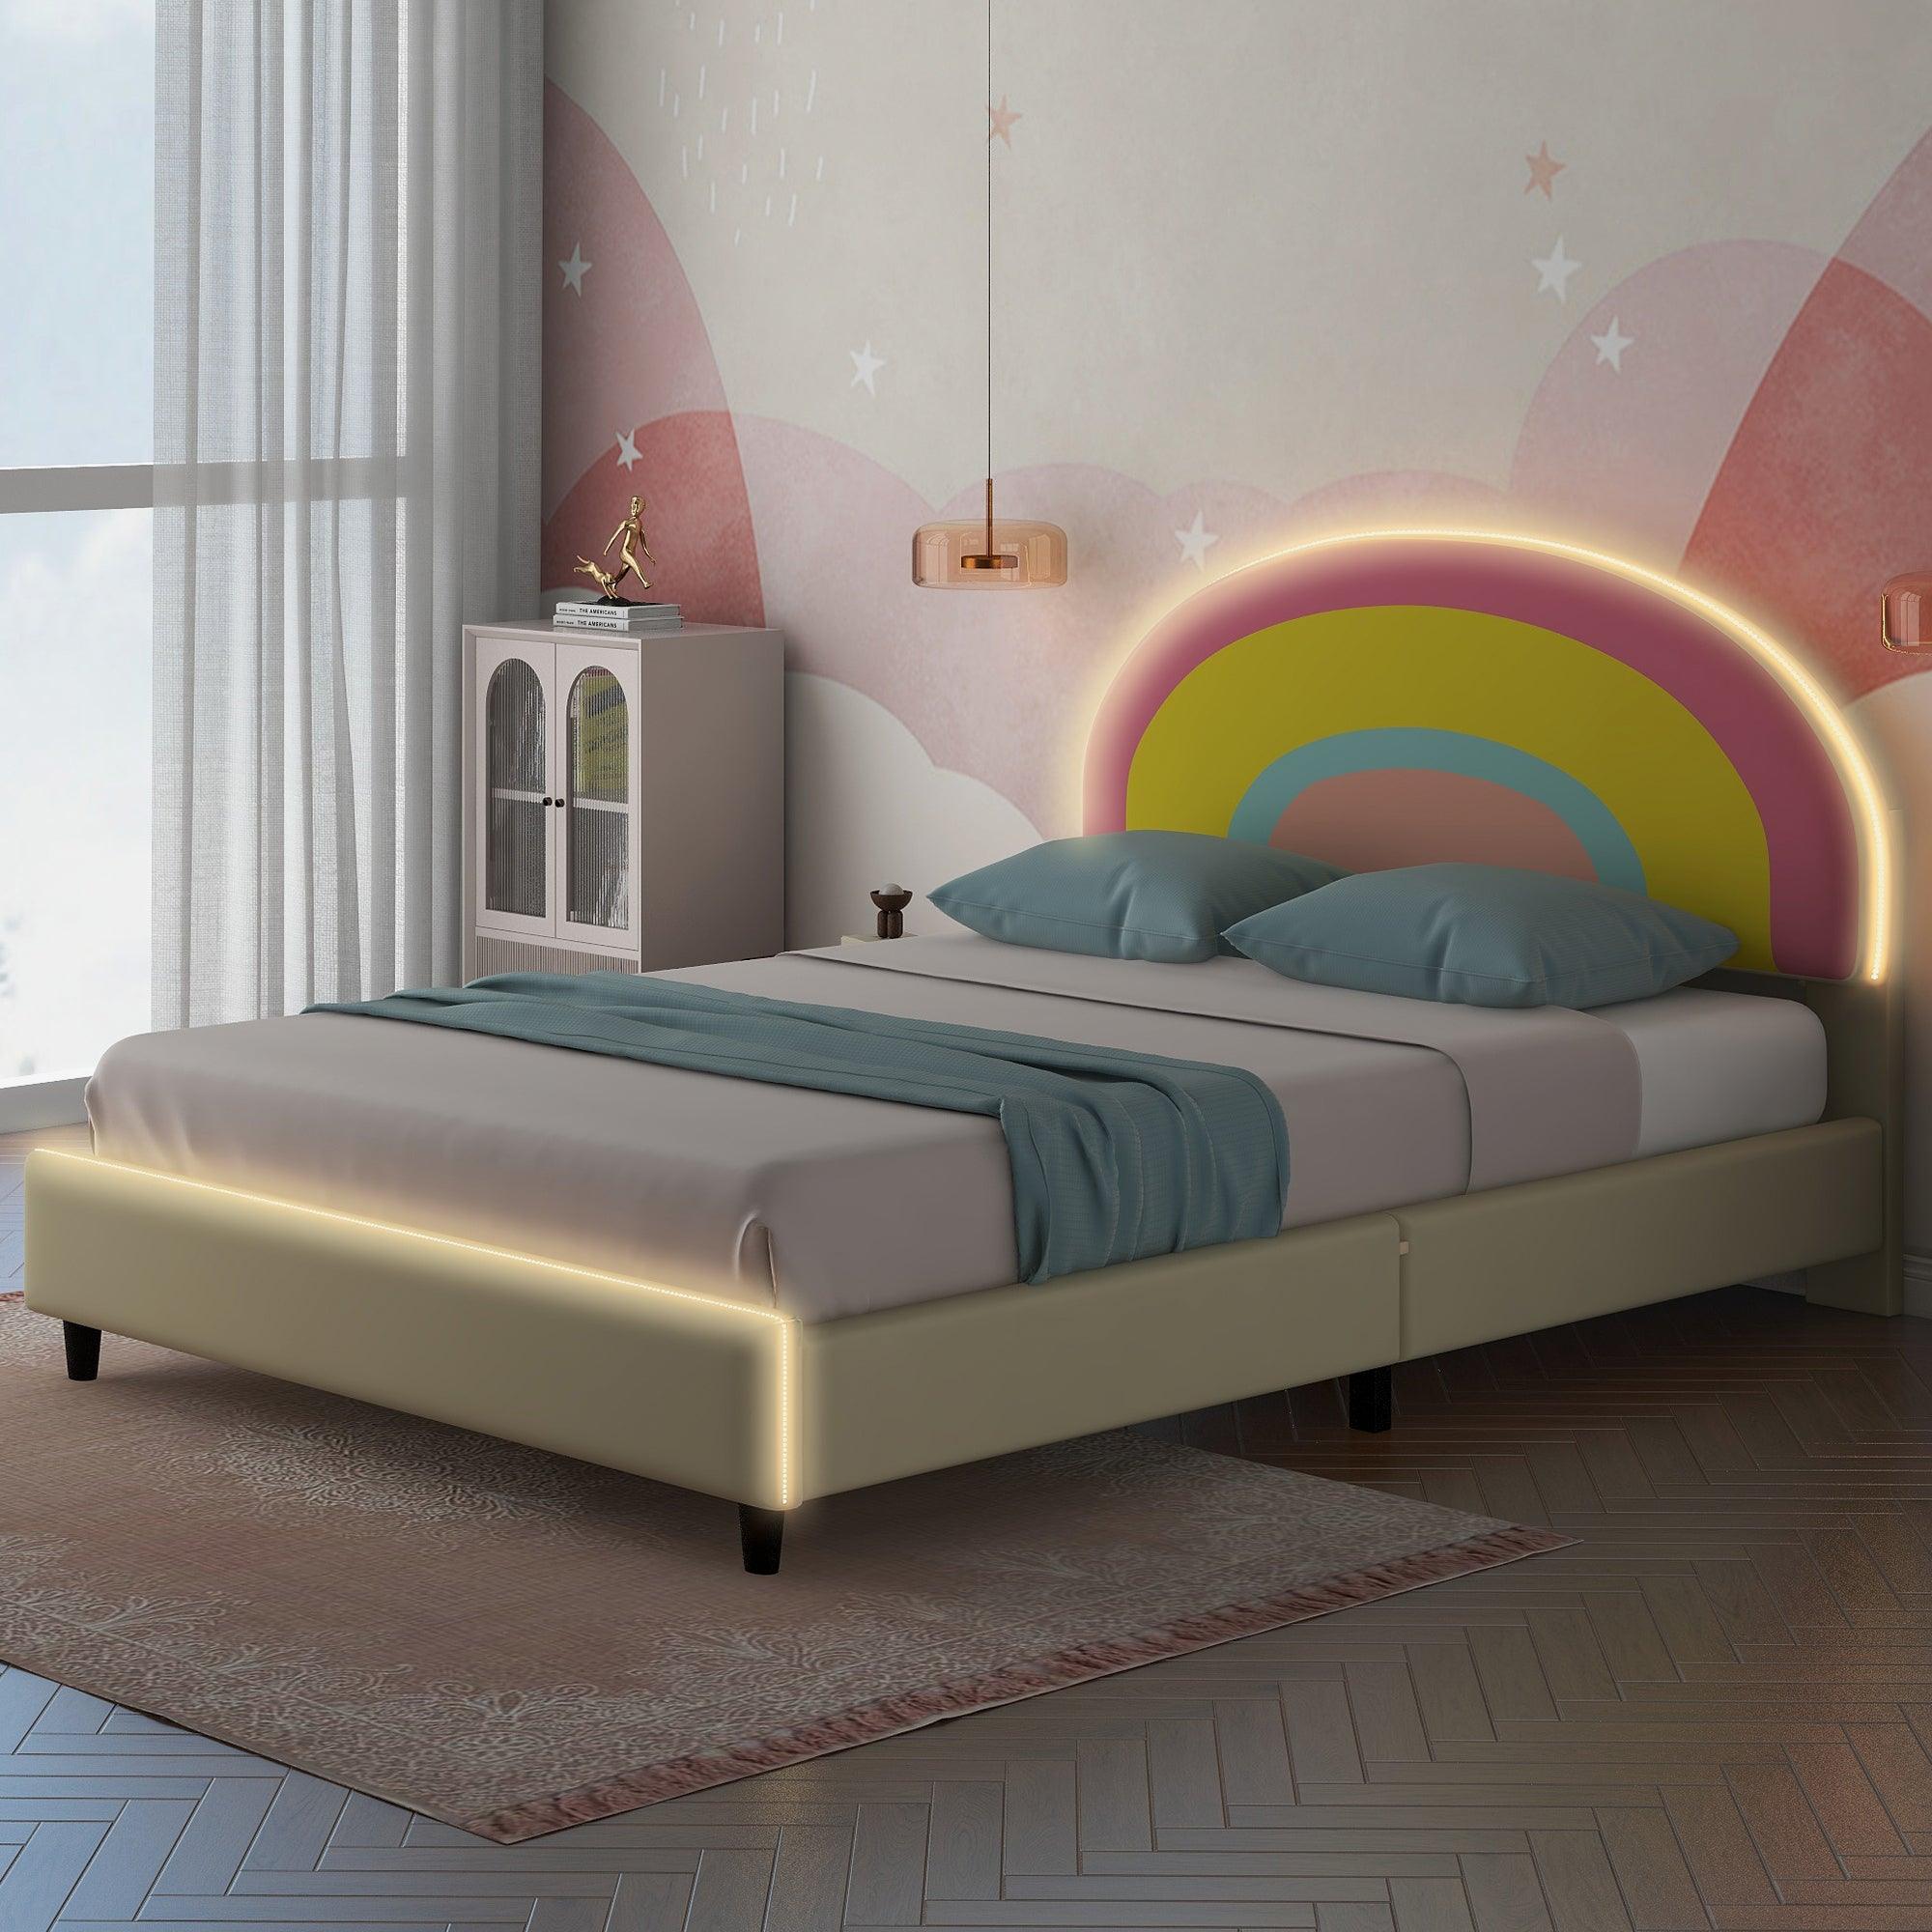 🆓🚛 Twin Size Upholstered Platform Bed With Rainbow Shaped & Height-Adjustbale Headboard, Led Light Strips, Beige